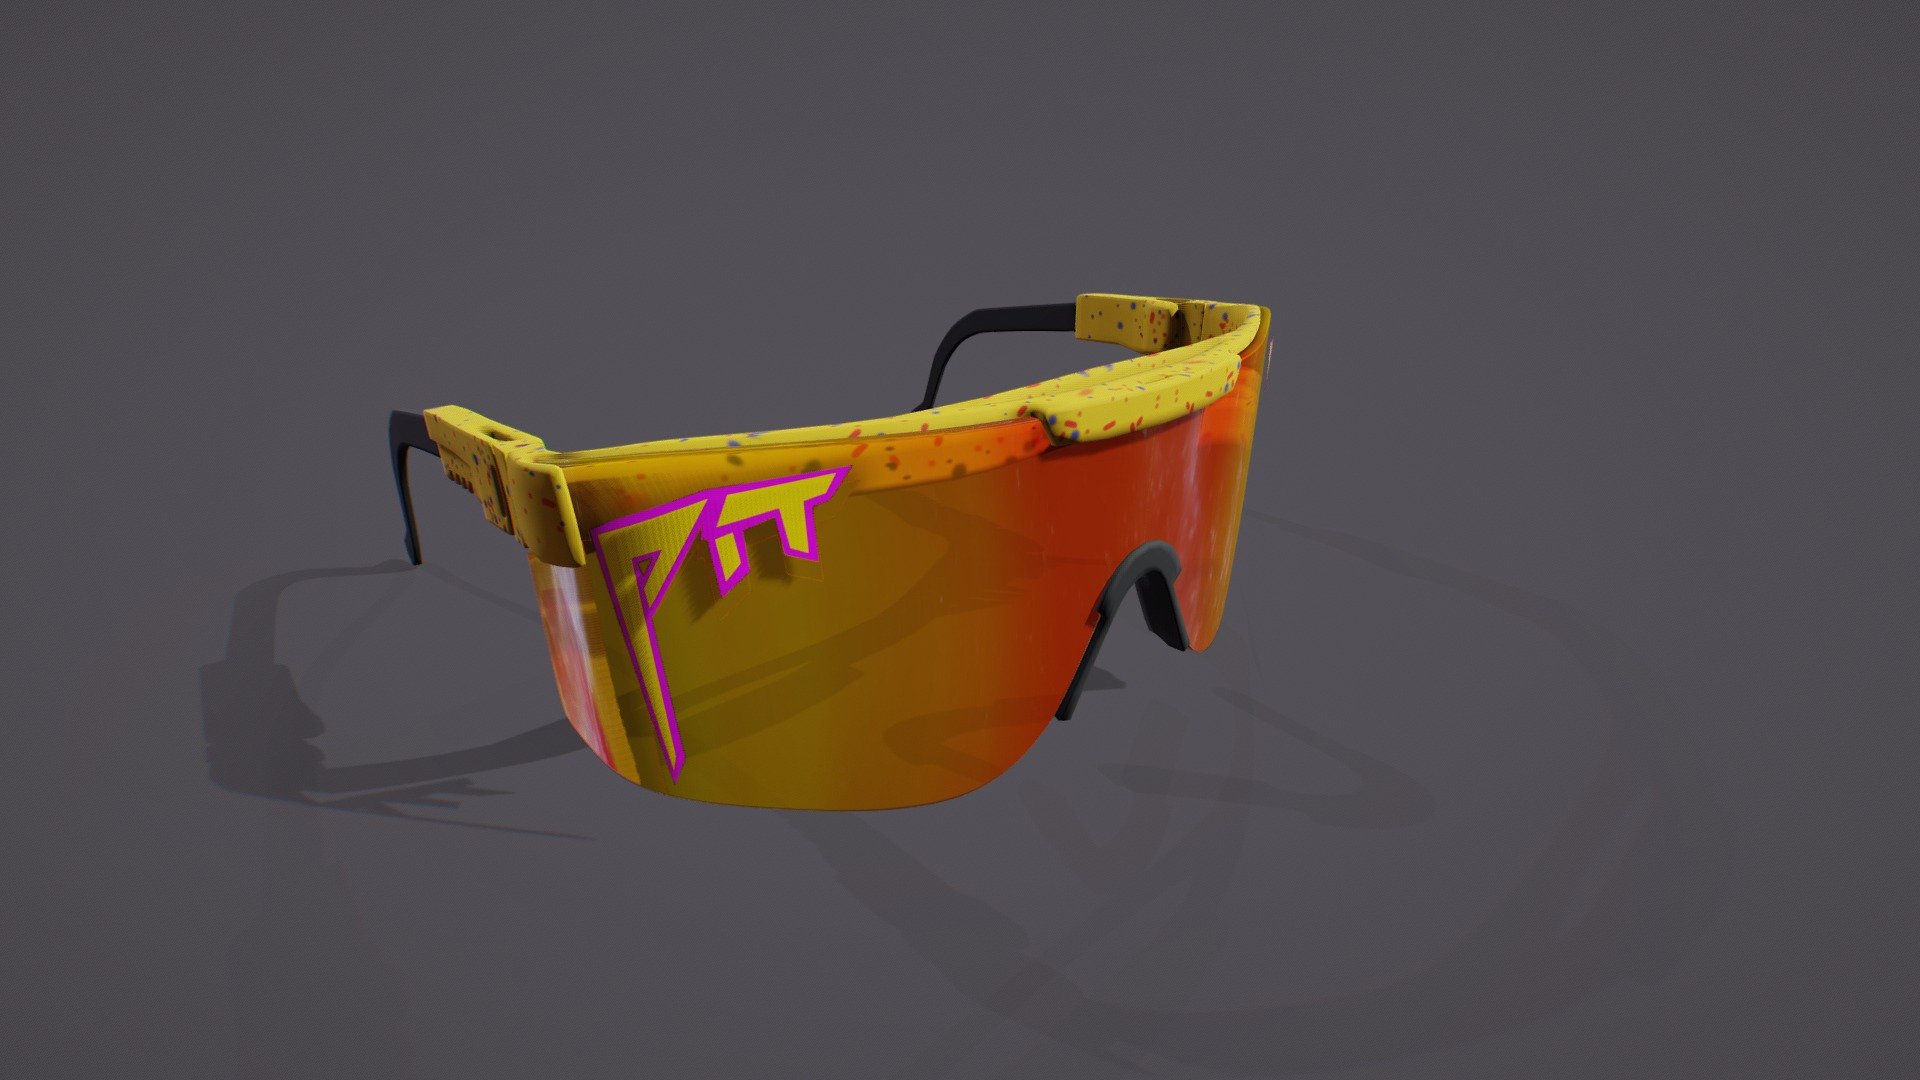 Pit Vipers - The 1993 Polarized